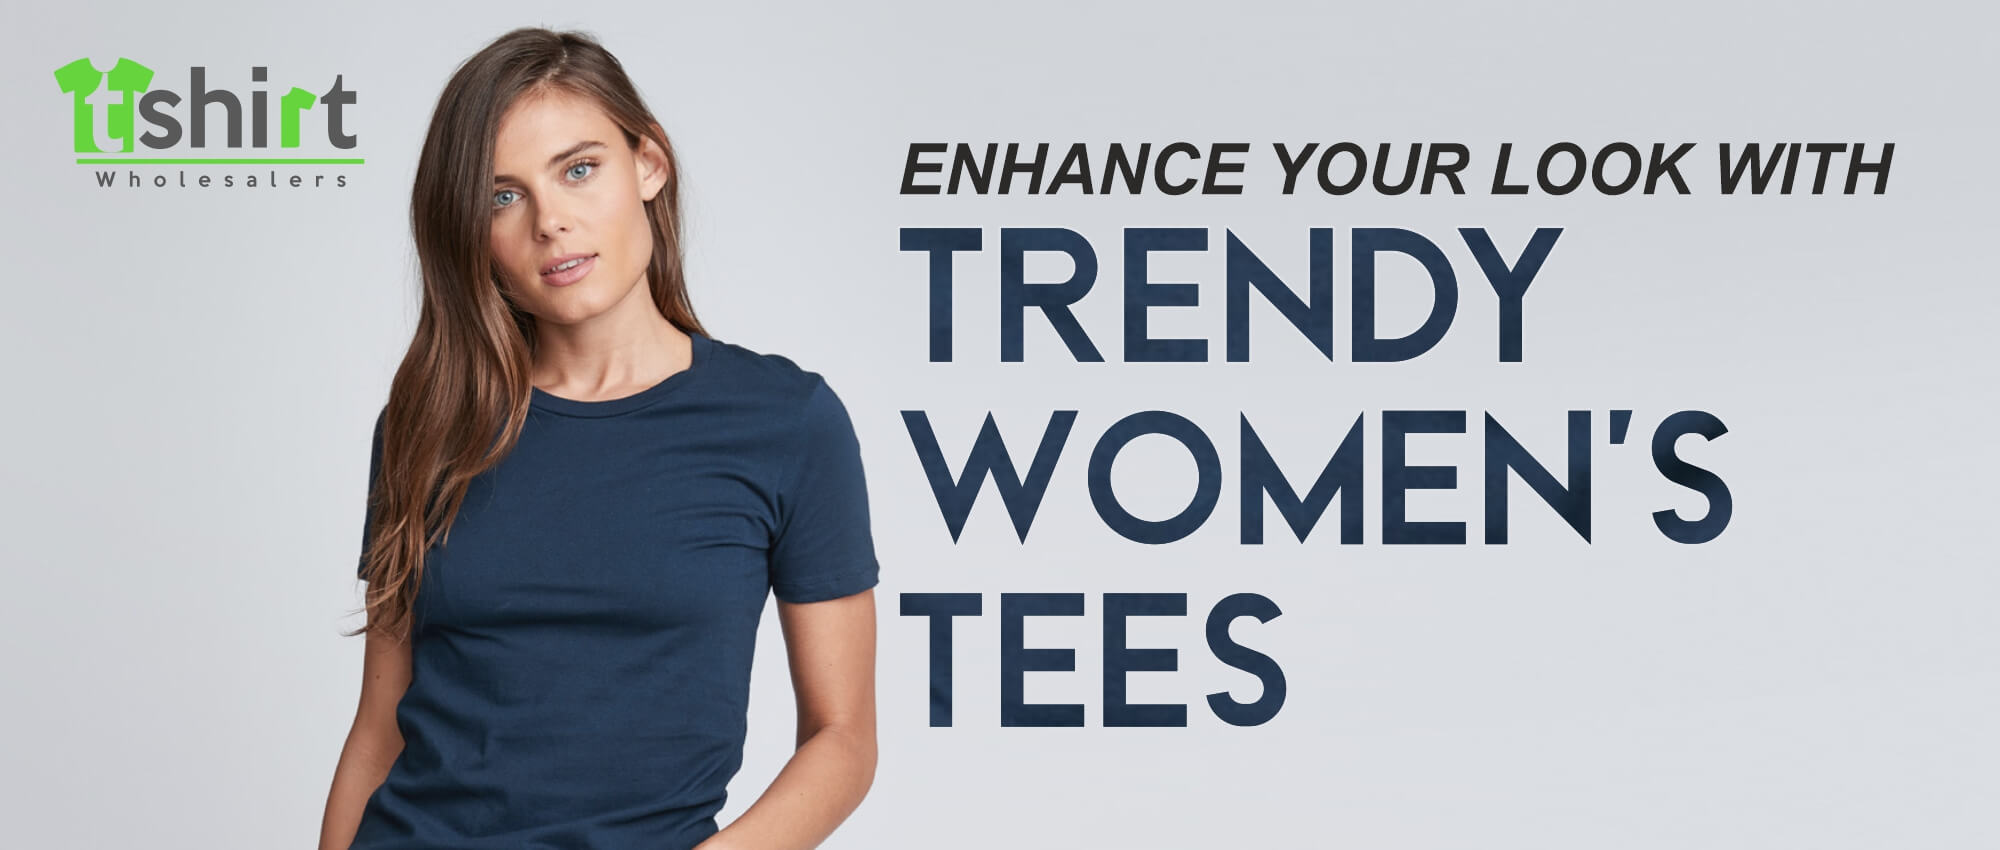 ENHANCE YOUR LOOK WITH TRENDY WOMEN'S TEES